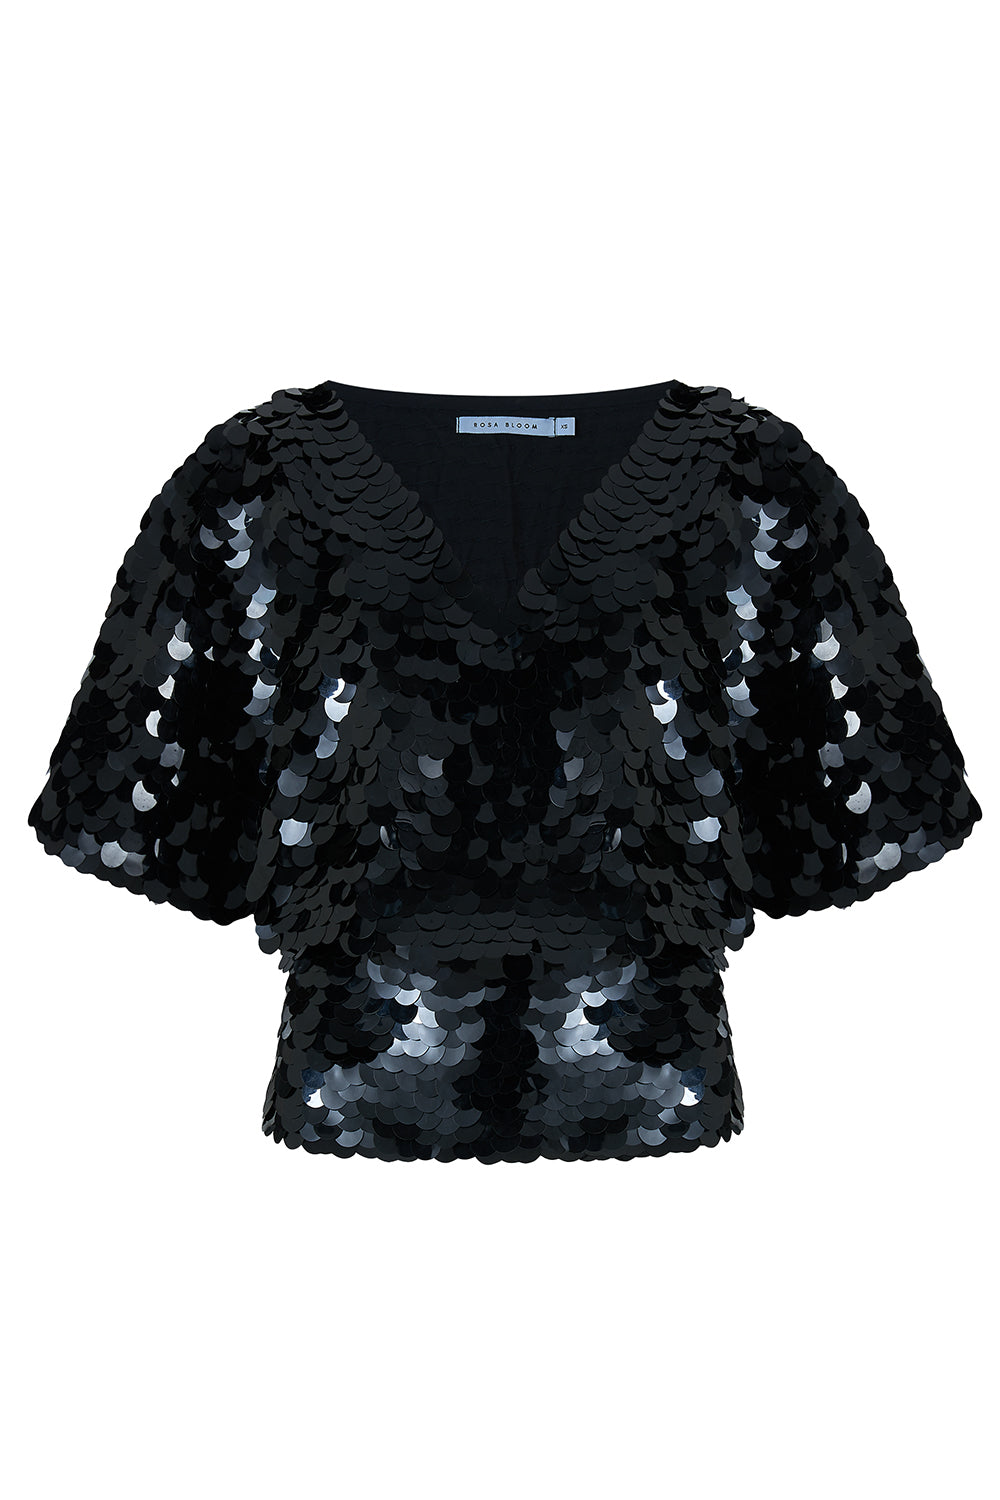 Florence Cape top in Black